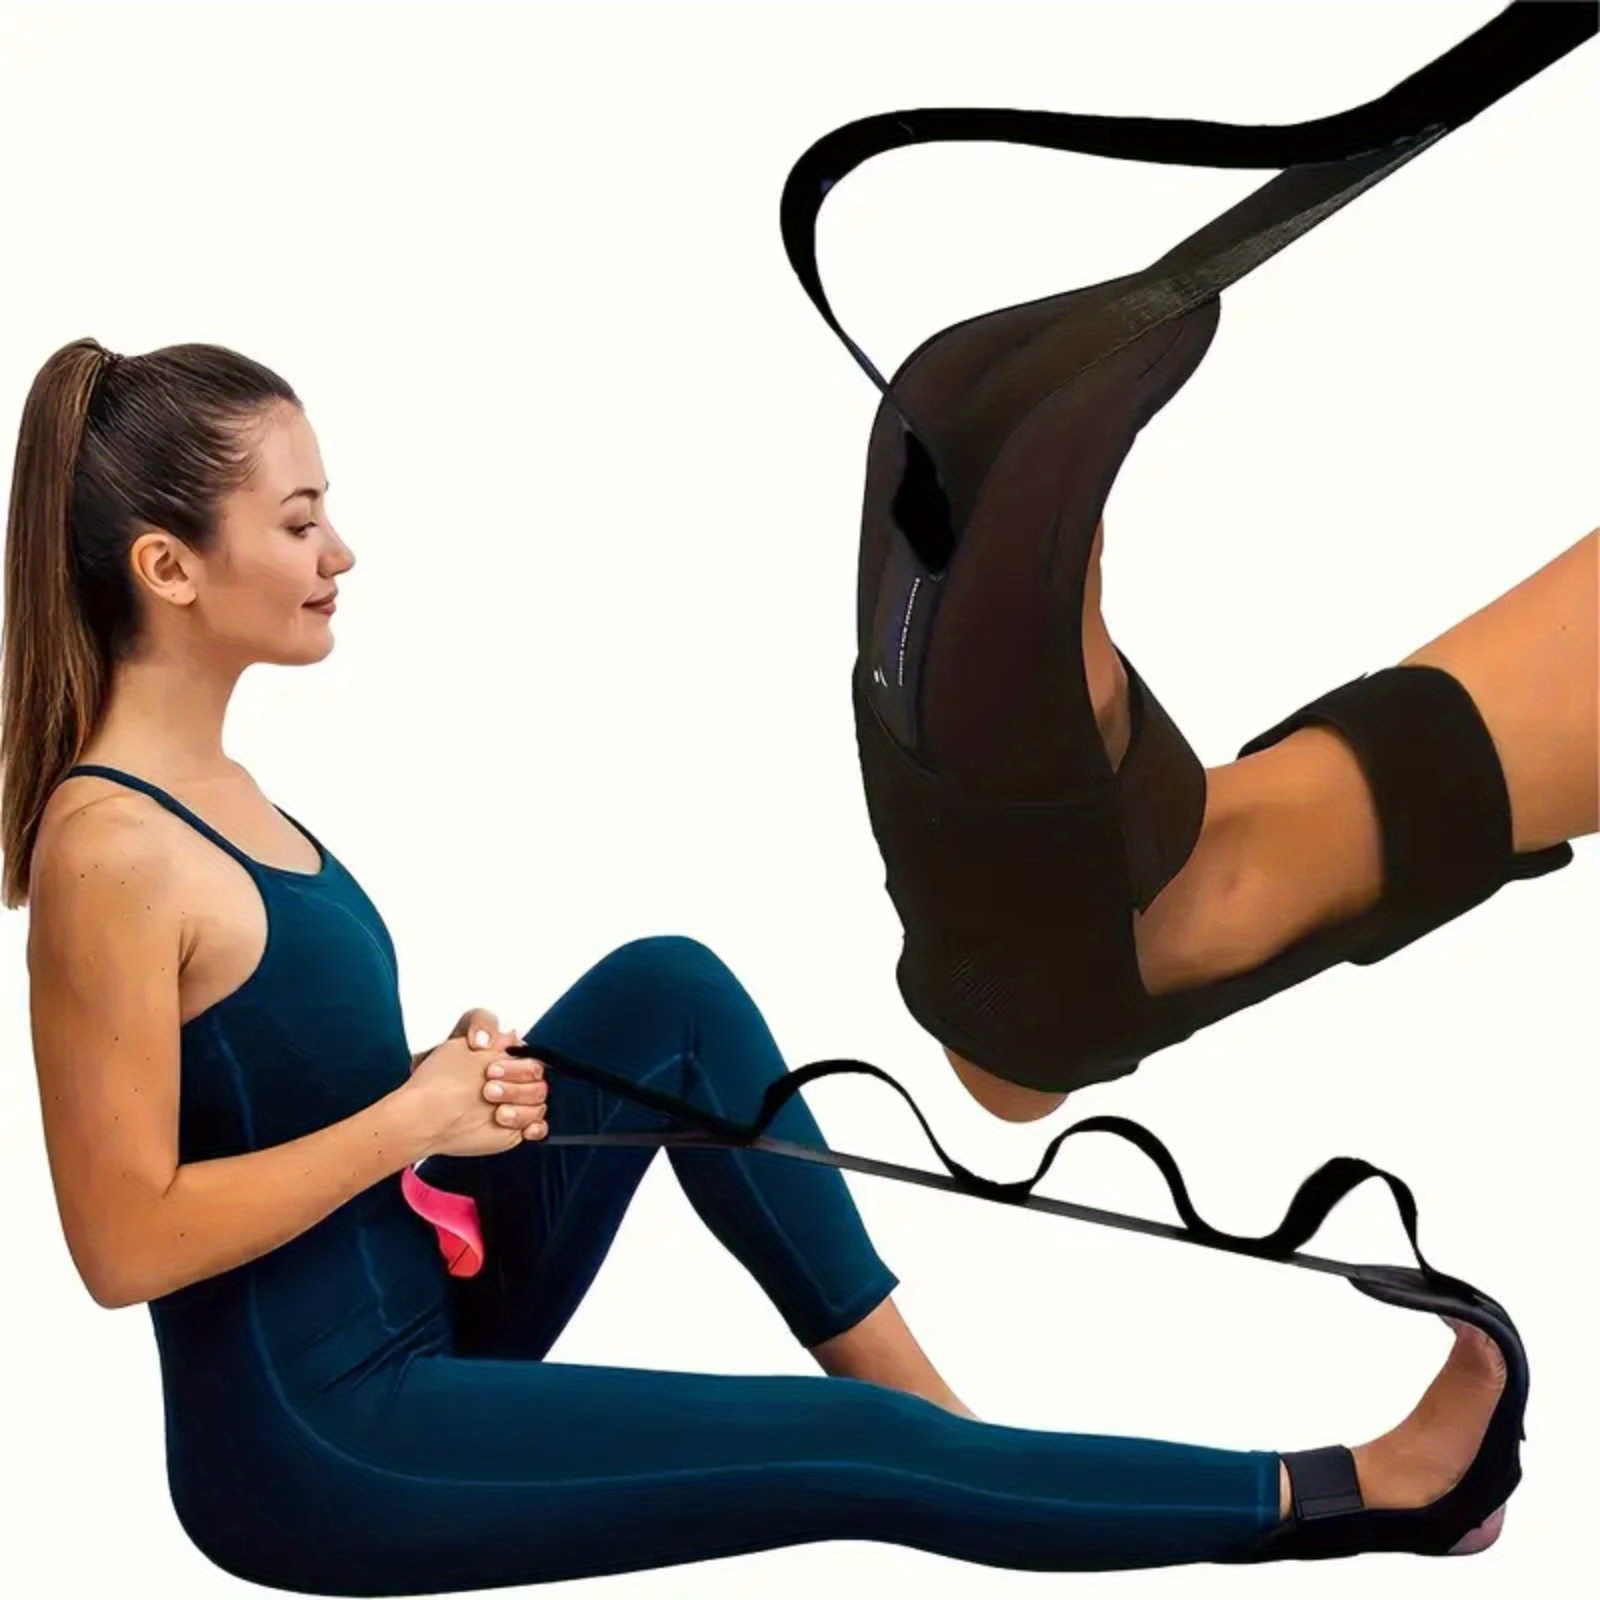 Foot and Calf Stretcher-Stretching Strap For Plantar Fasciitis, Heel Spurs,  Foot Drop, Achilles Tendonitis & Hamstring. Yoga Foot & Leg Stretch Strap.  (Black) 